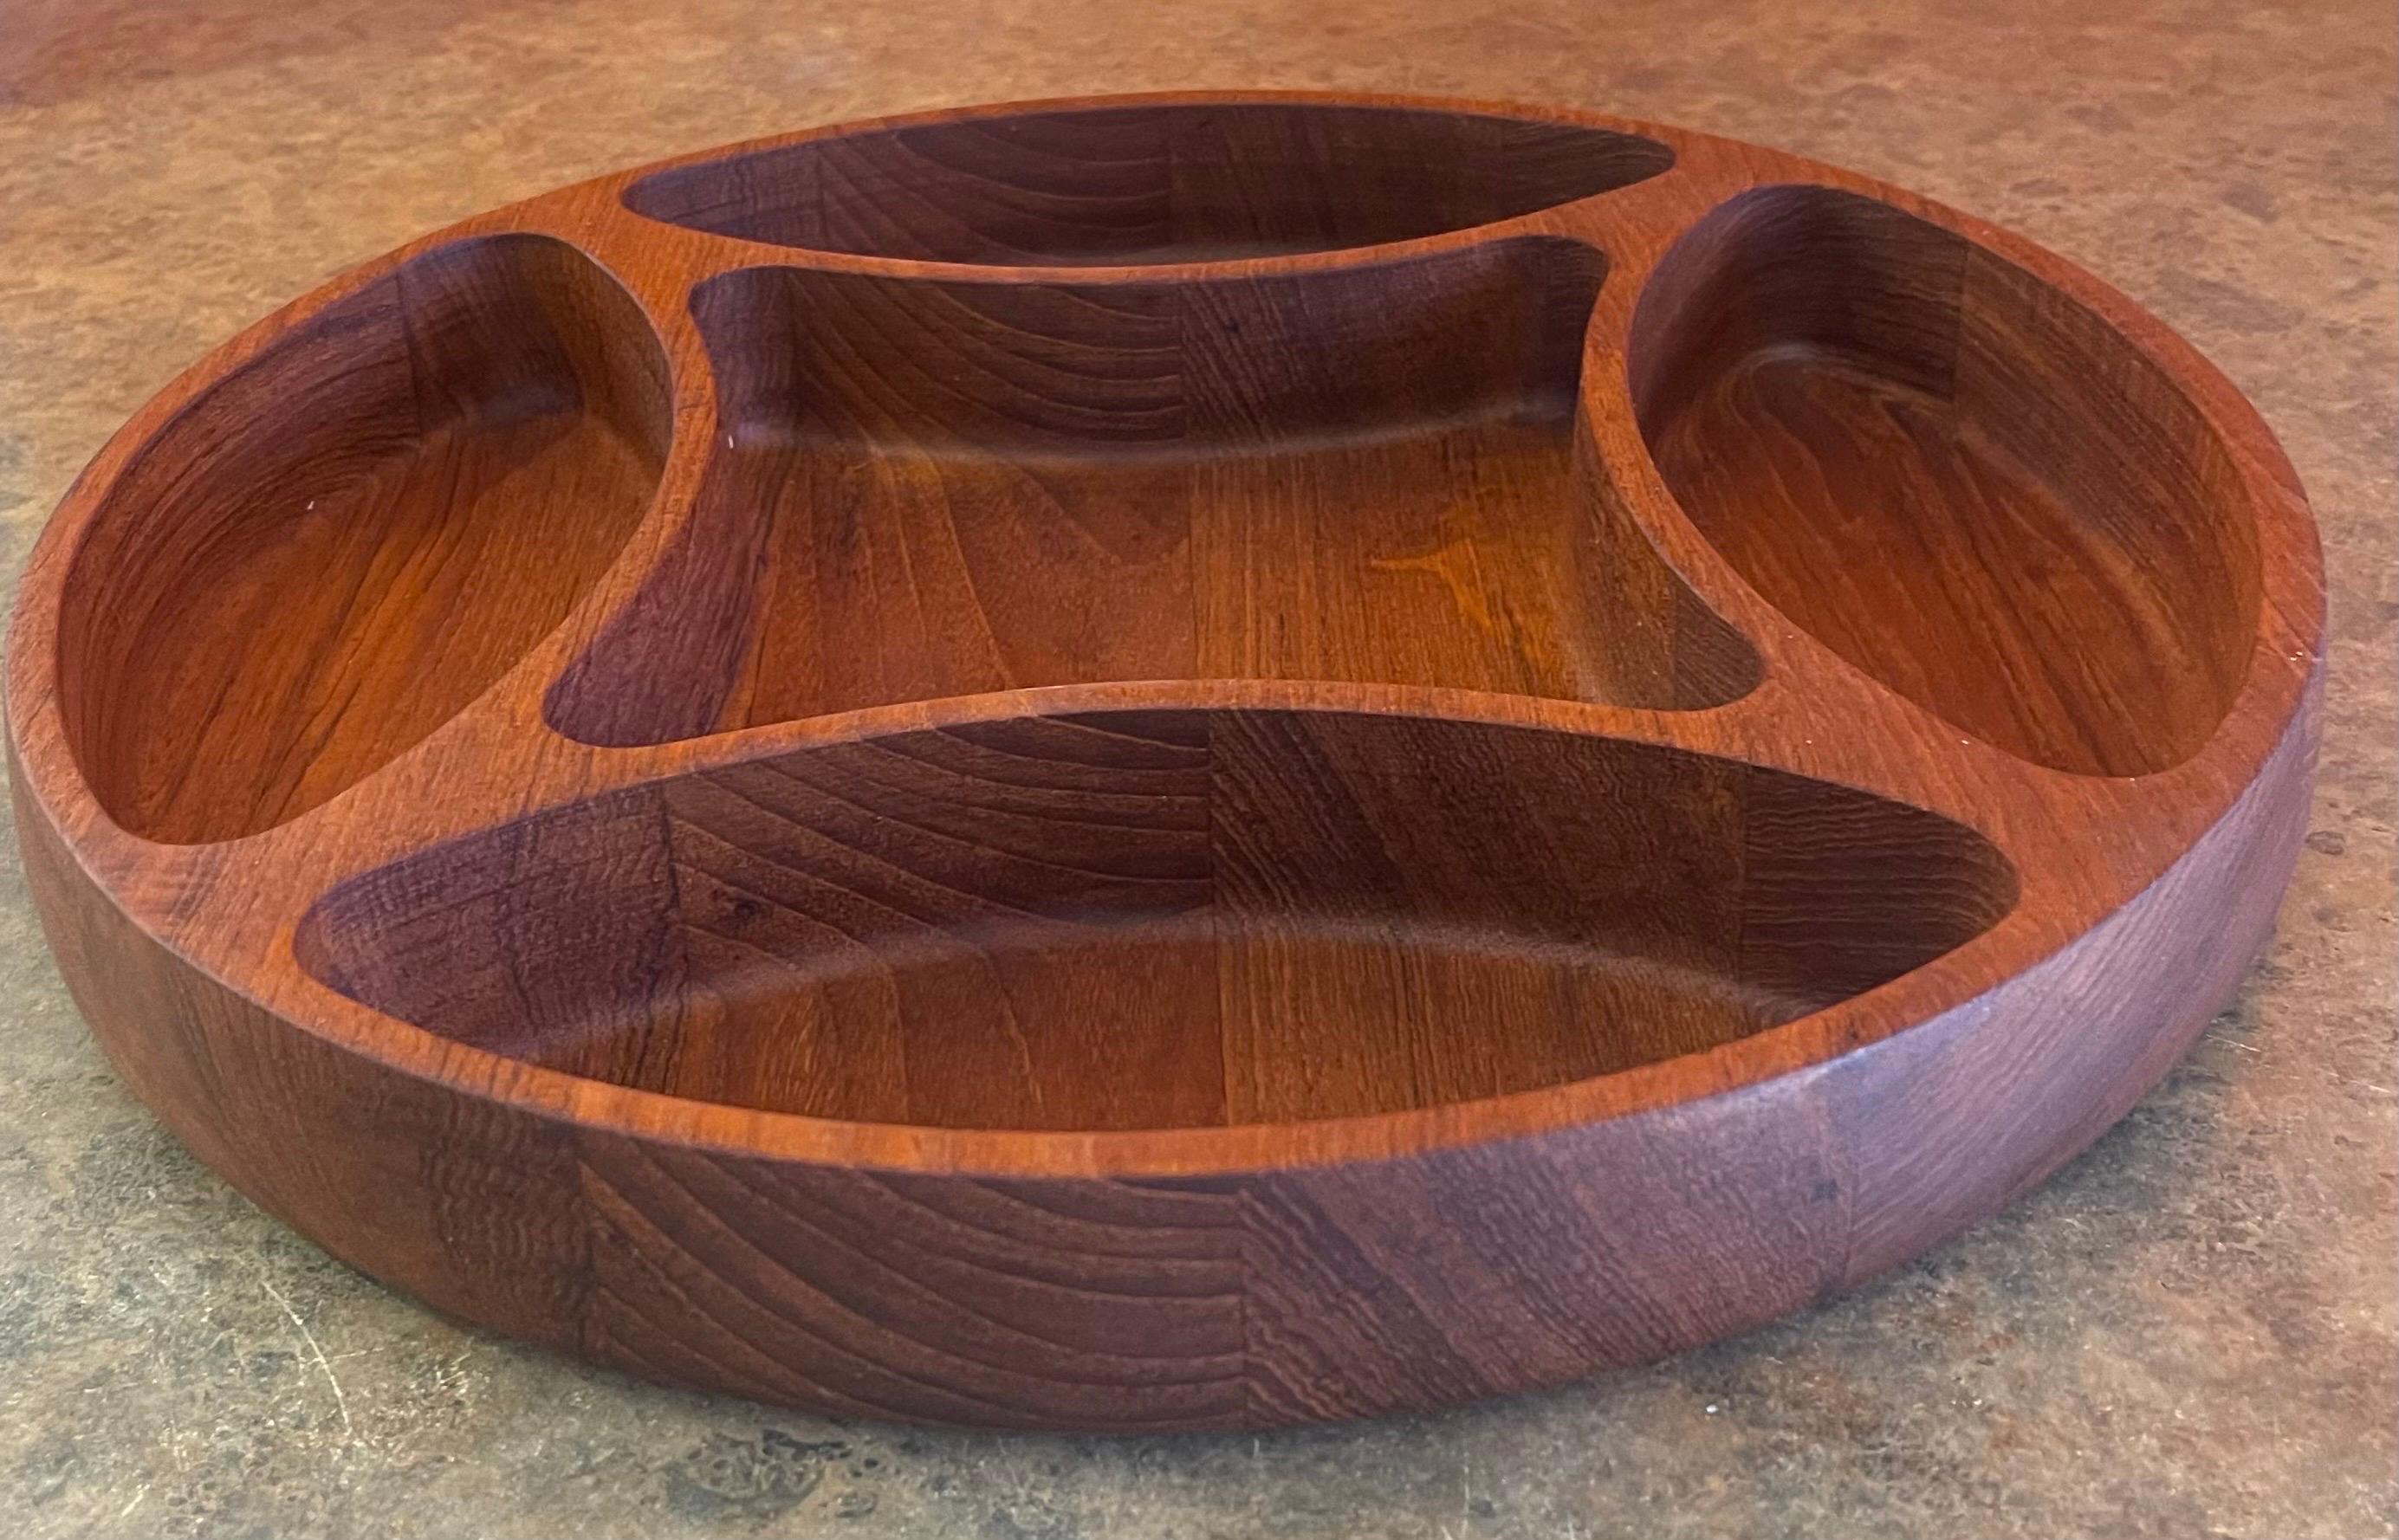 Large Divided Bowl / Tray in Teak by Jens Quistgaard for Dansk For Sale 5